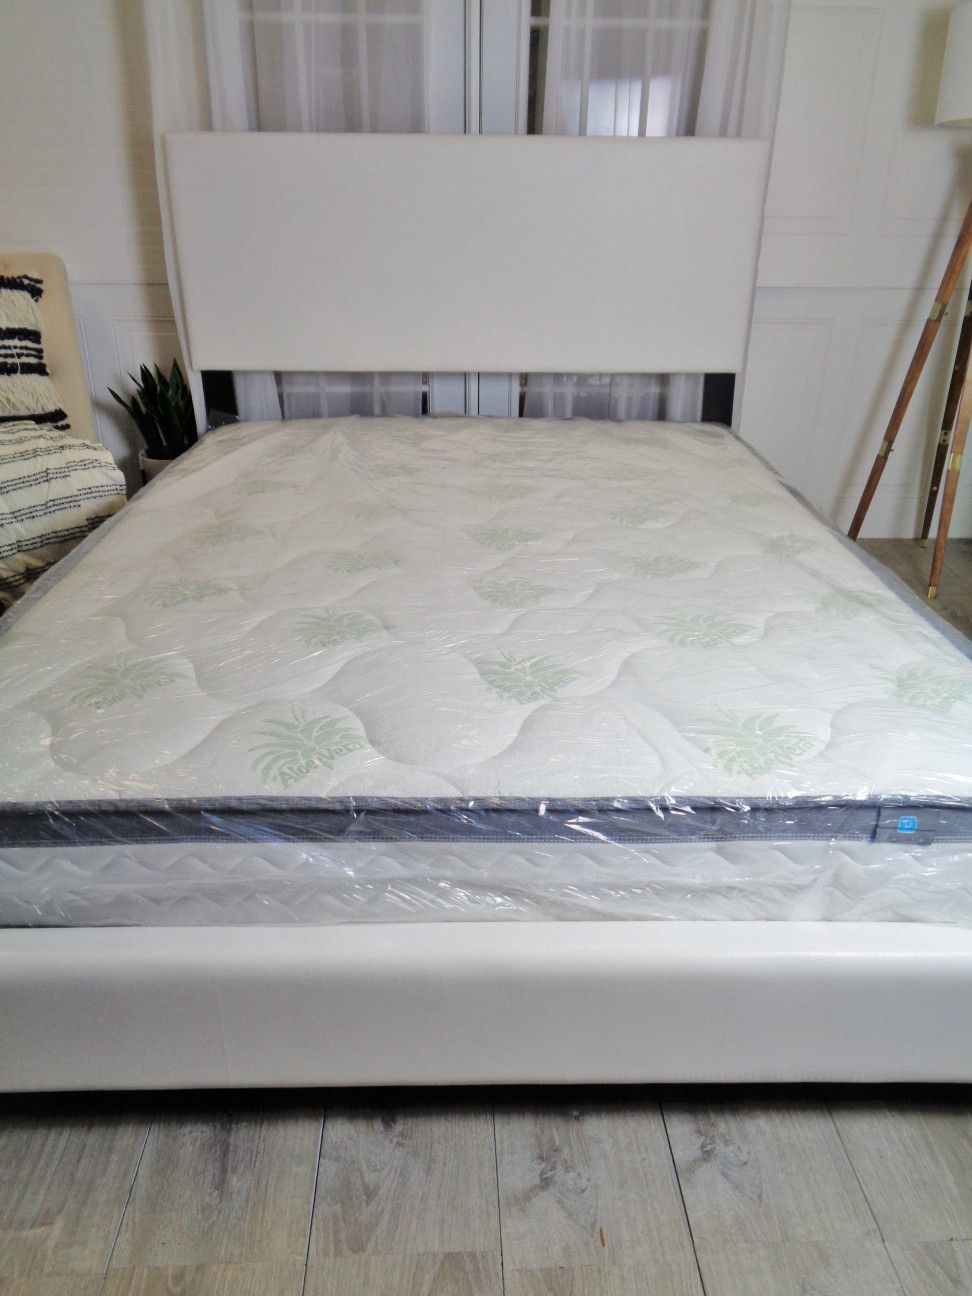 New queen leather bed frame